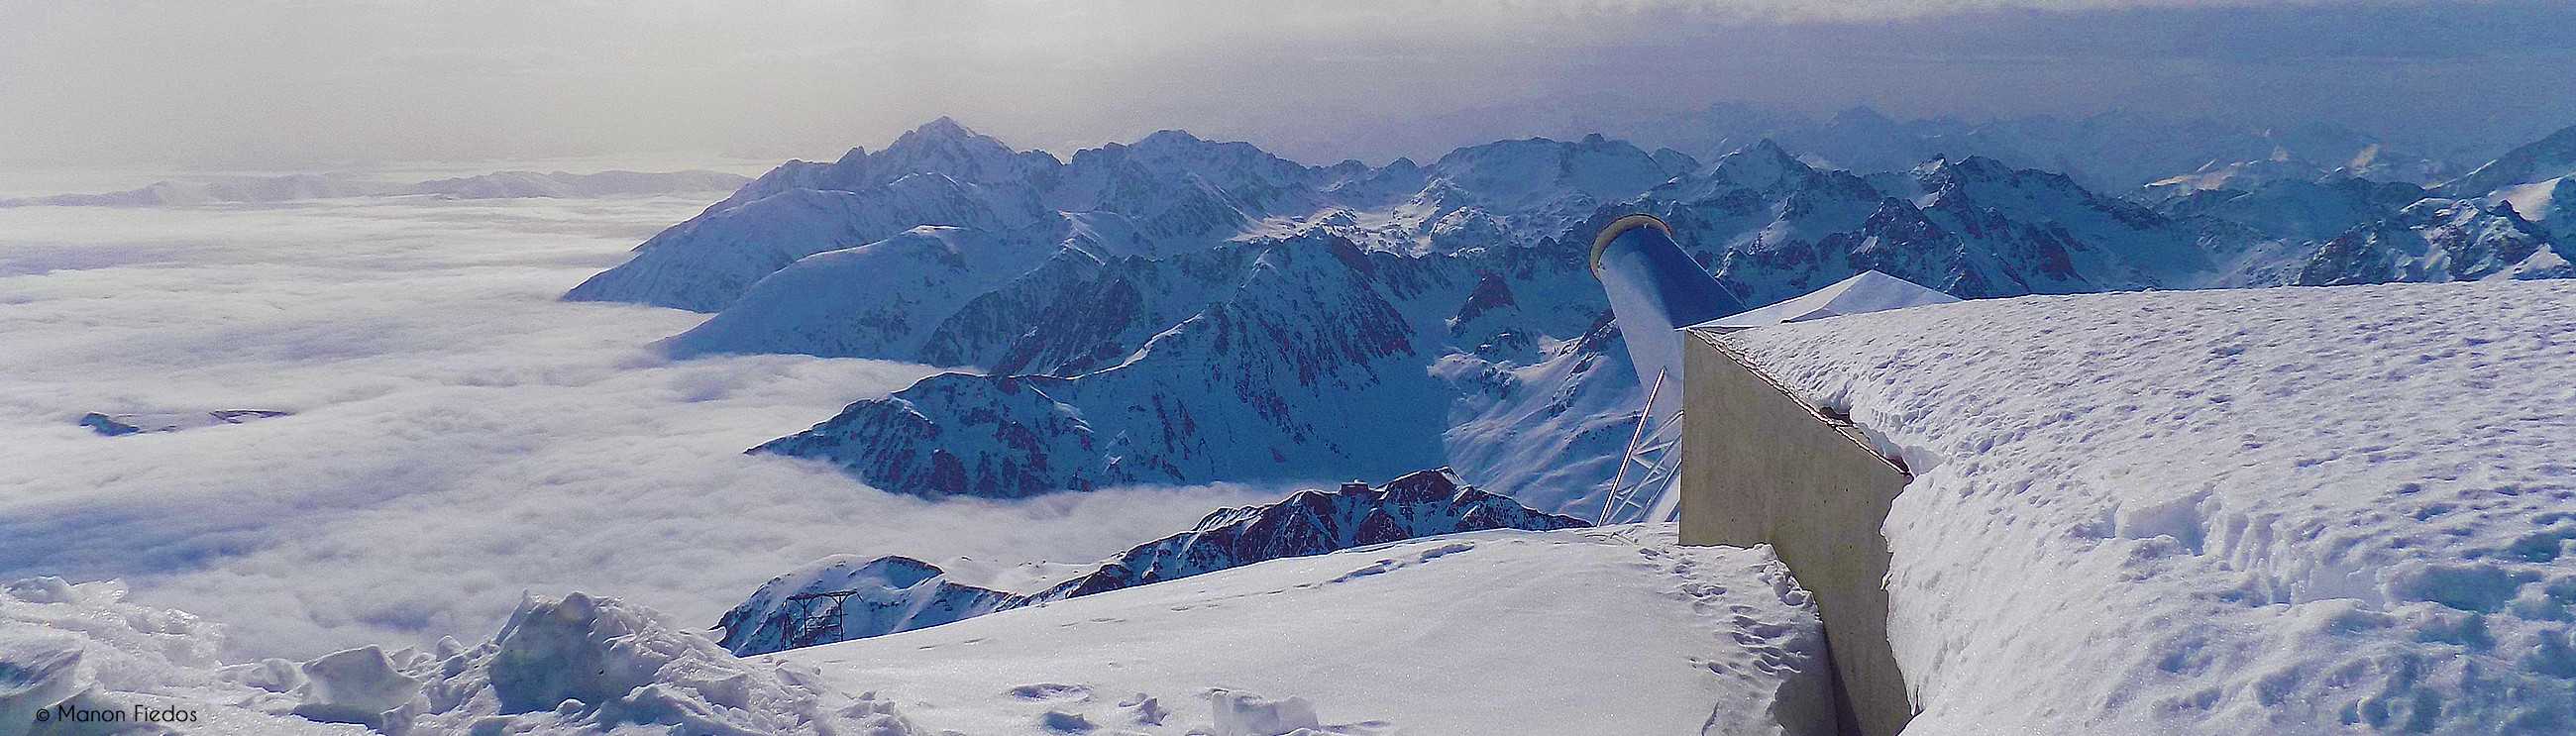 Landscape seen from the Pic du Midi by Manon Fiedos